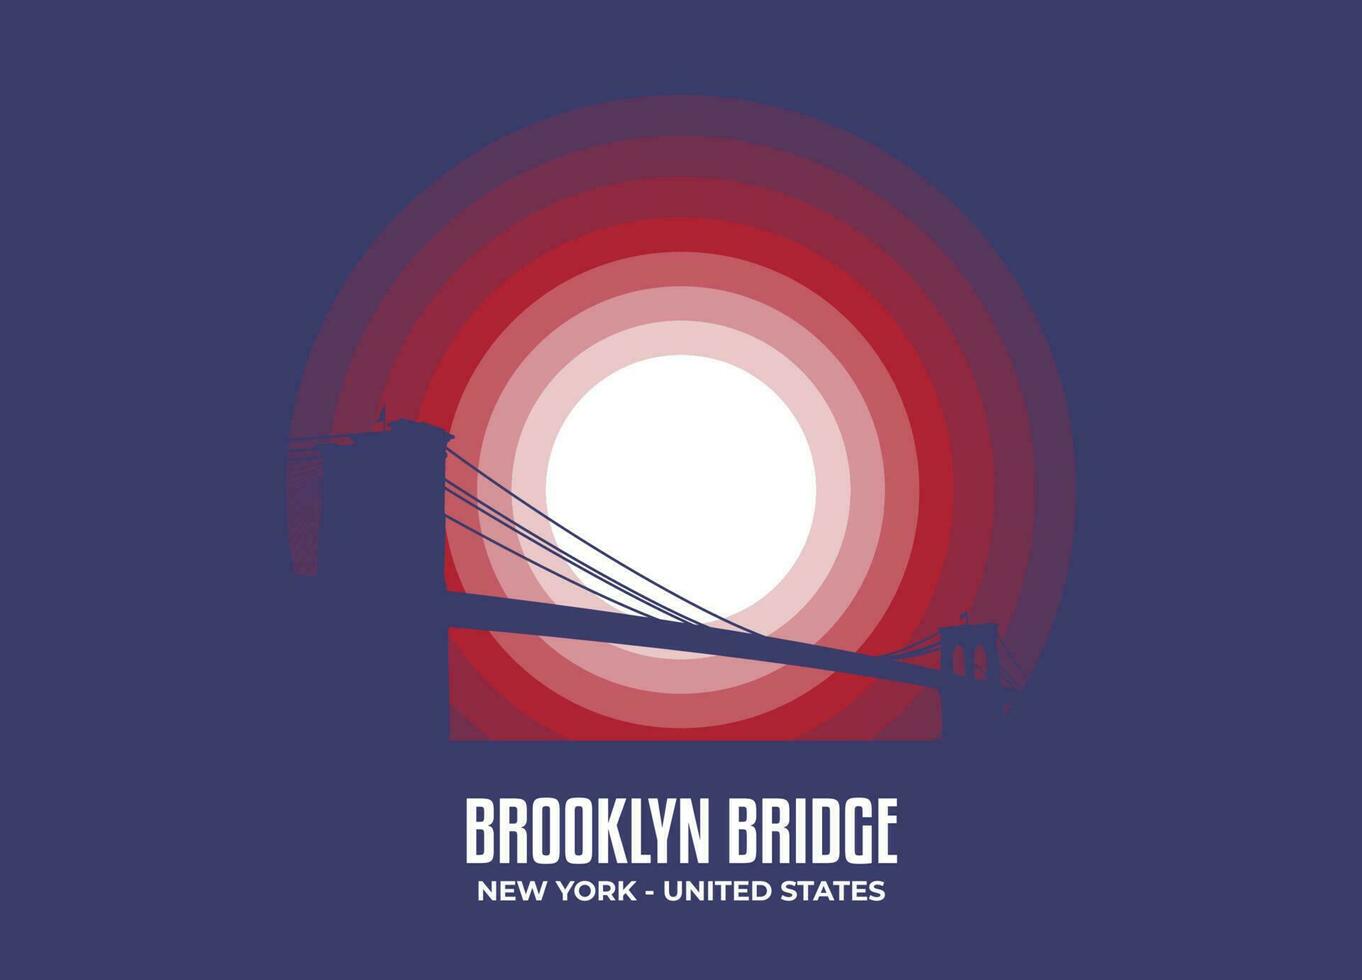 Brooklyn Bridge. Moonlight illustration of famous historical statue and architecture in United States of America. Color tone based on flag. Vector eps 10